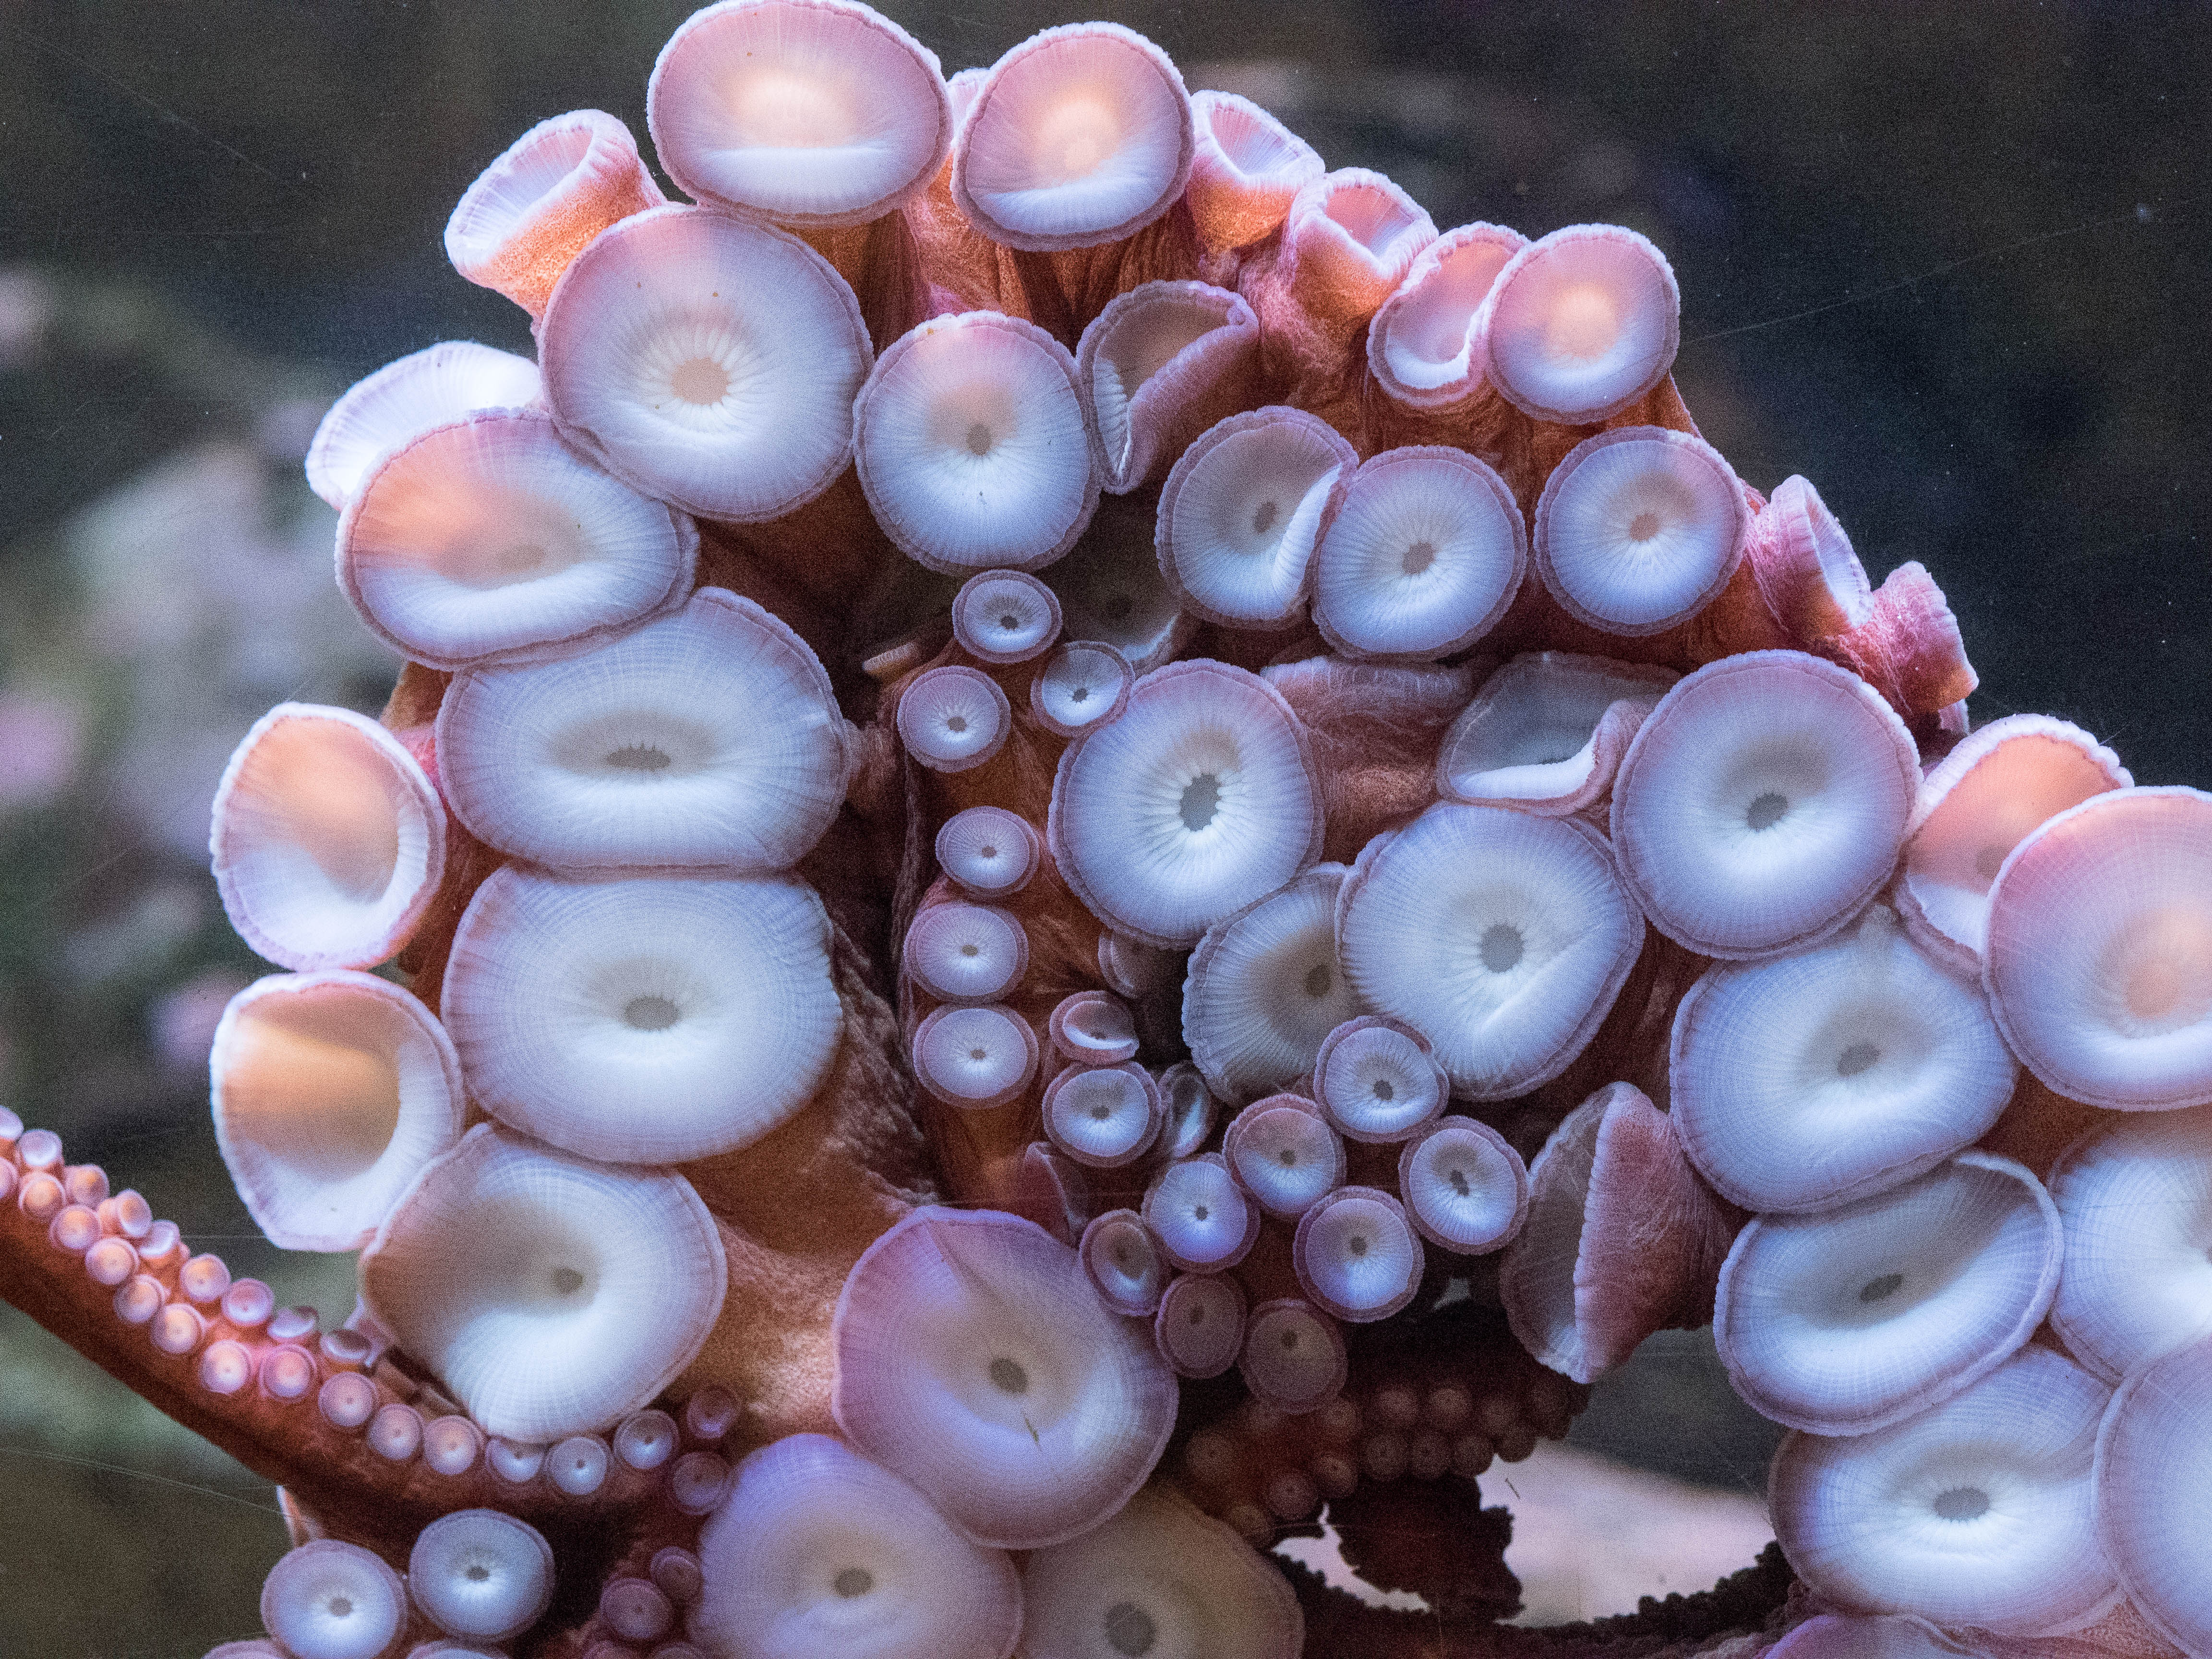 a close-up of the suckers on an octopus arm